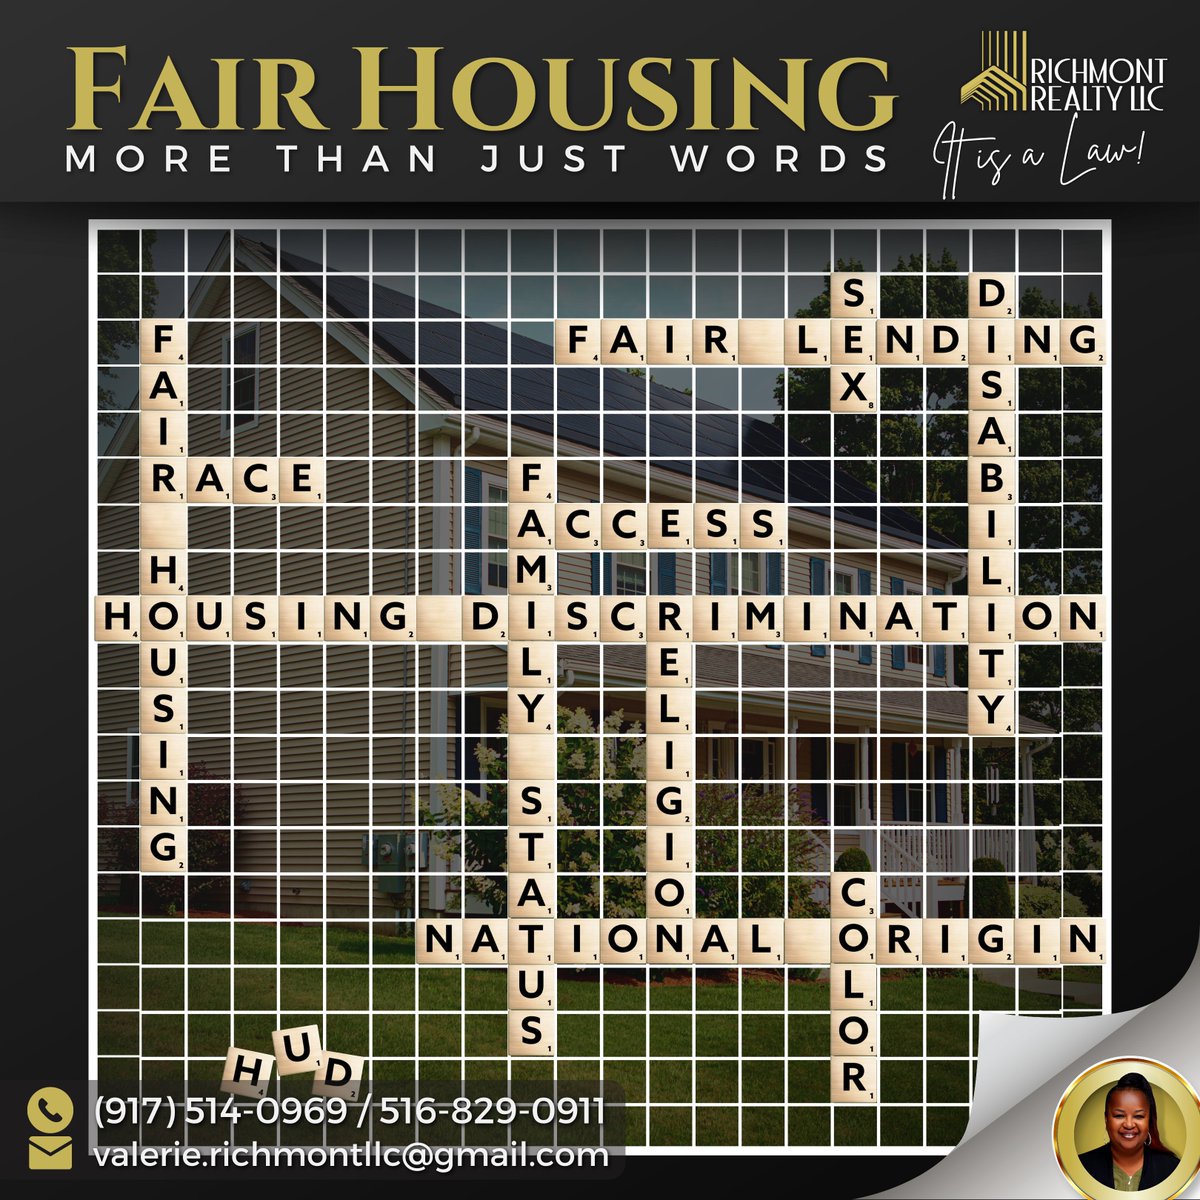 Fair Housing Month signifies the recommitment to equality in homeownership.  

Continuing to keep you informed and connected…….
.
.
.
#realestatetipsandadvice #realestateexpert #realestatesunday #fairhousing #FairHousingMonth #fairhousing2023 #FairHousingForAll